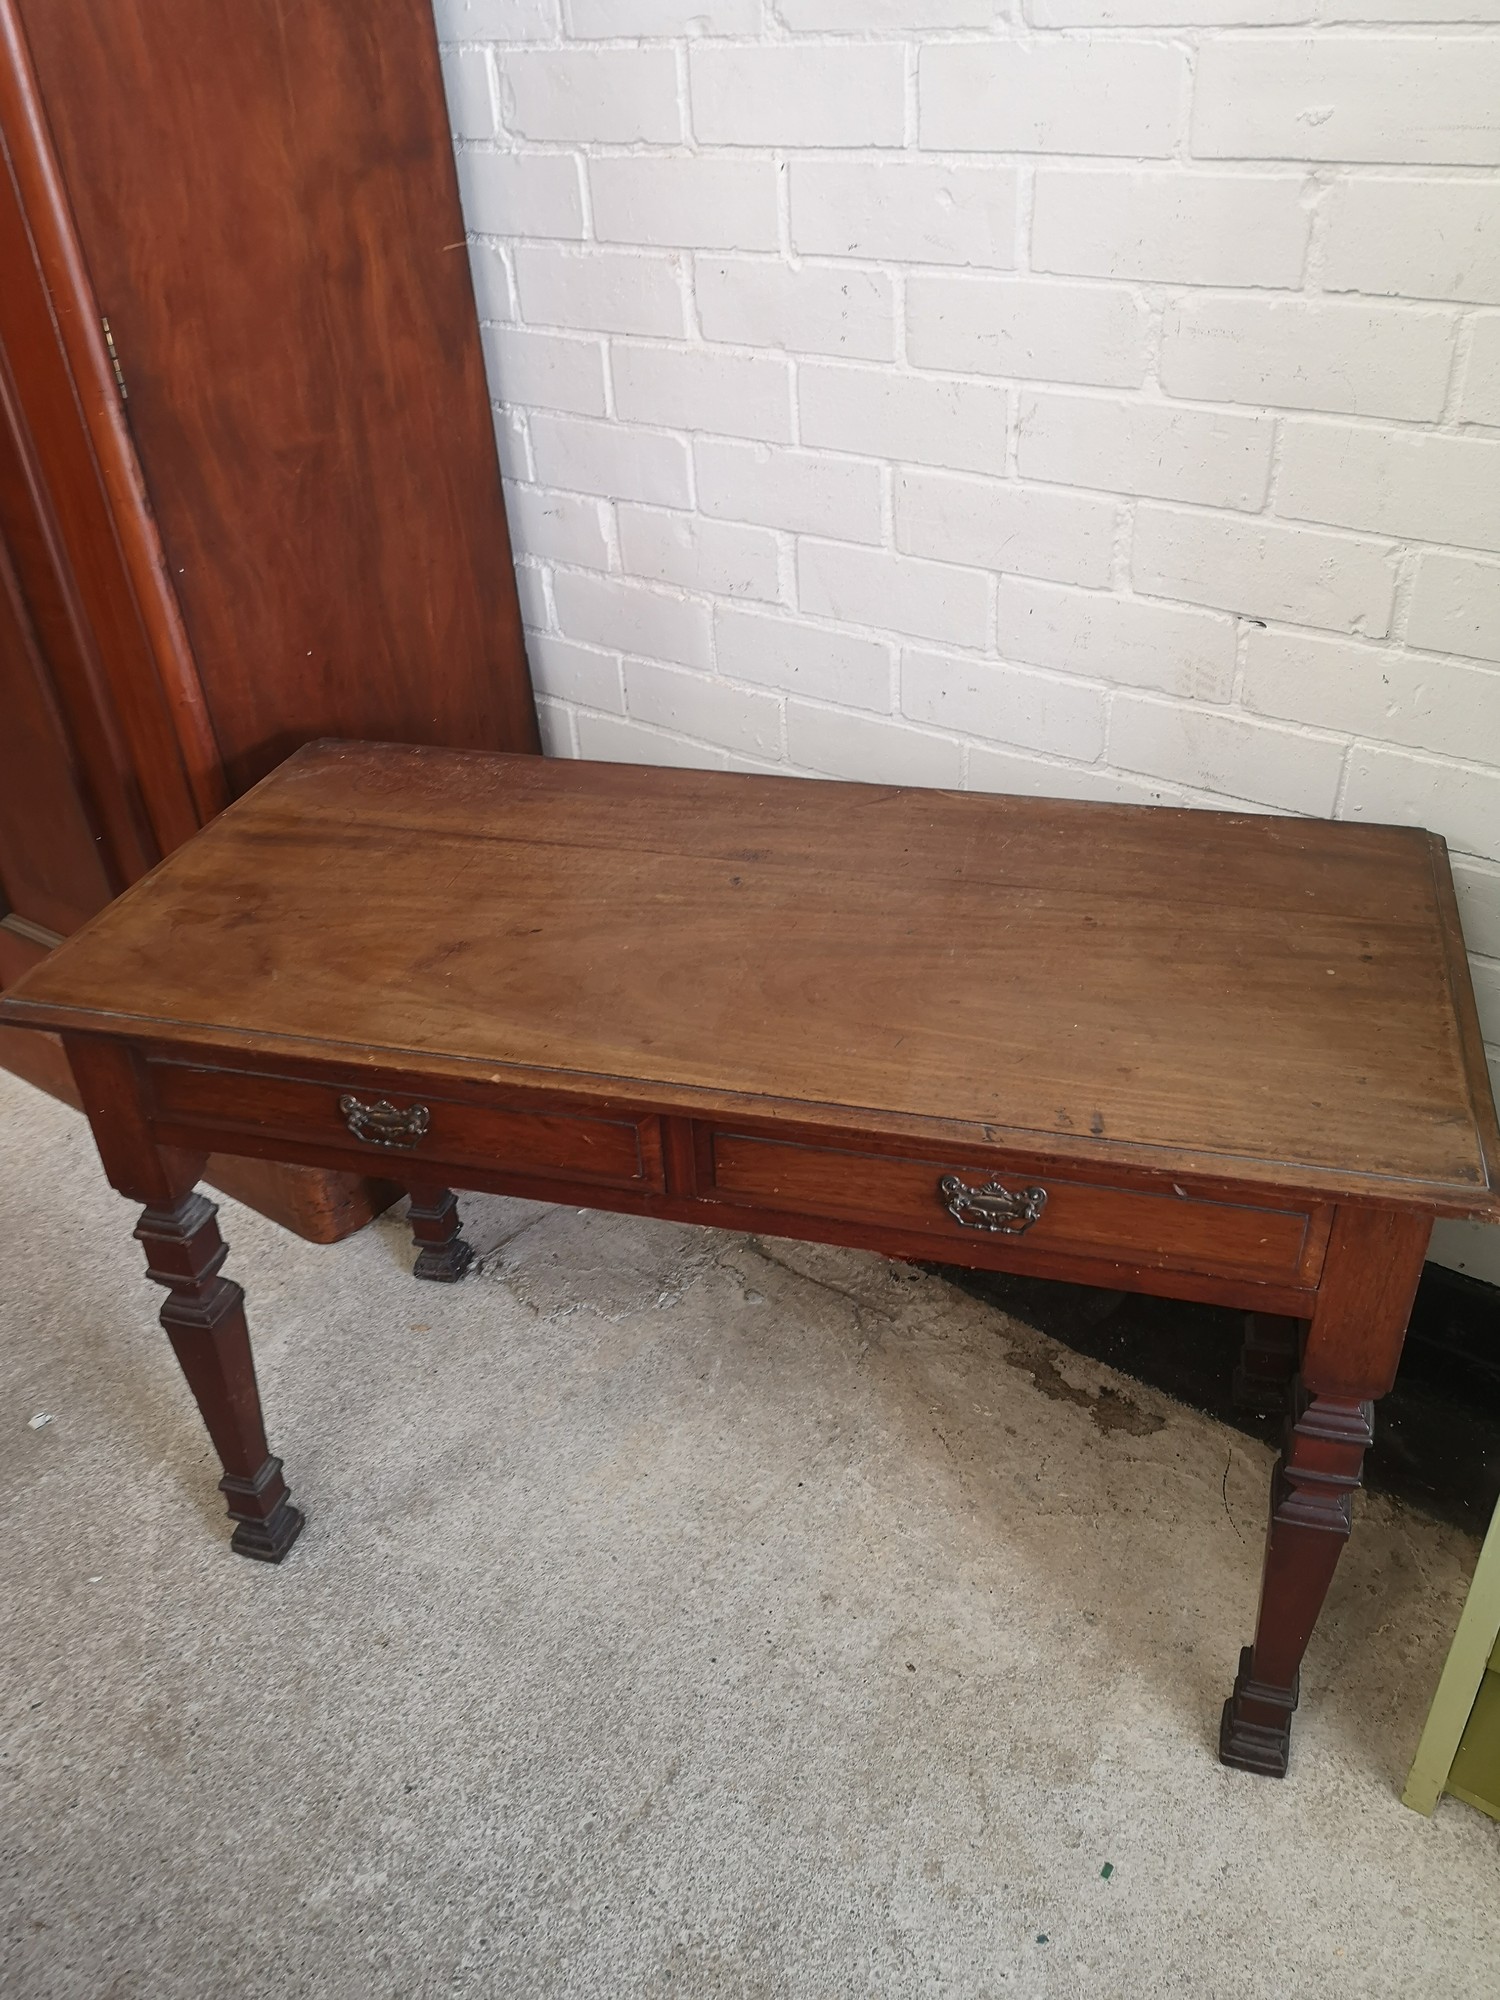 Late 18th century 2 drawer console table with fitted handles. - Image 2 of 3